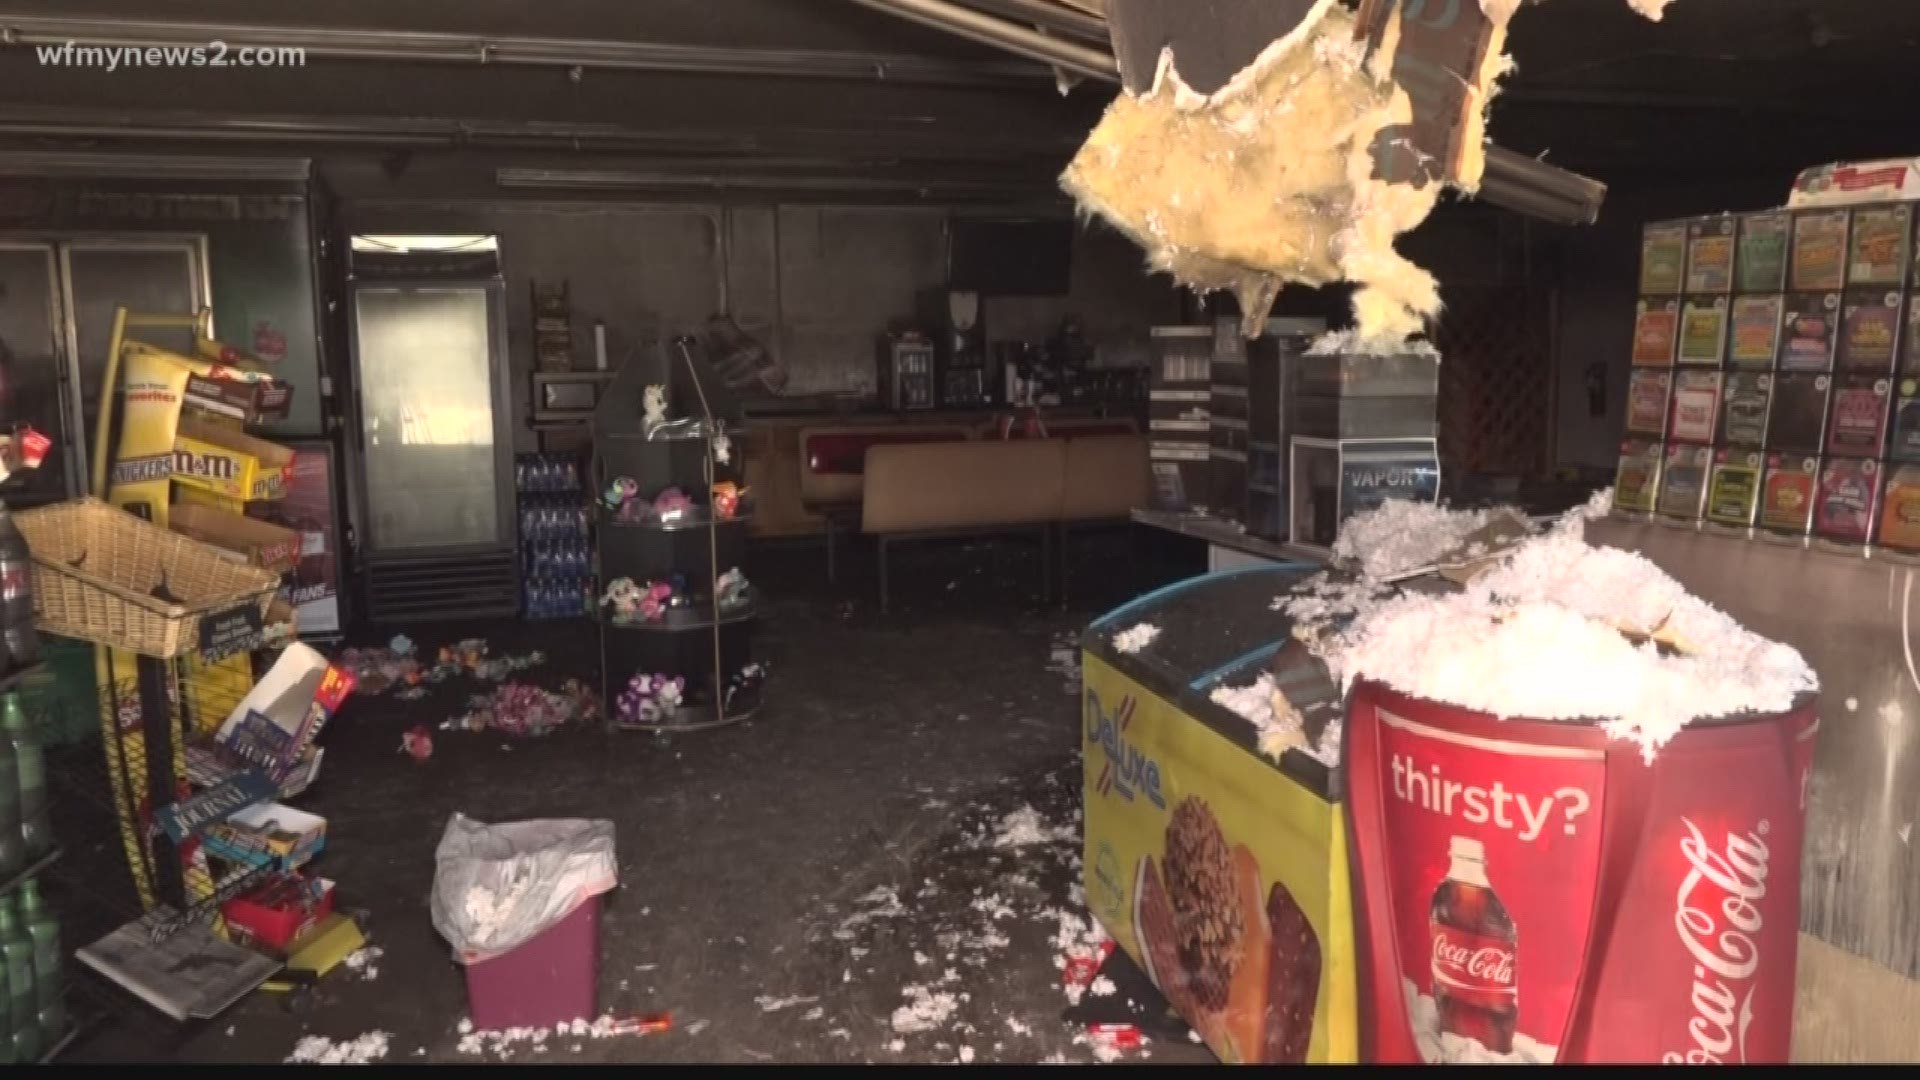 The Stop and Save store on Styers Ferry Road was robbed and set on fire with a store clerk inside.